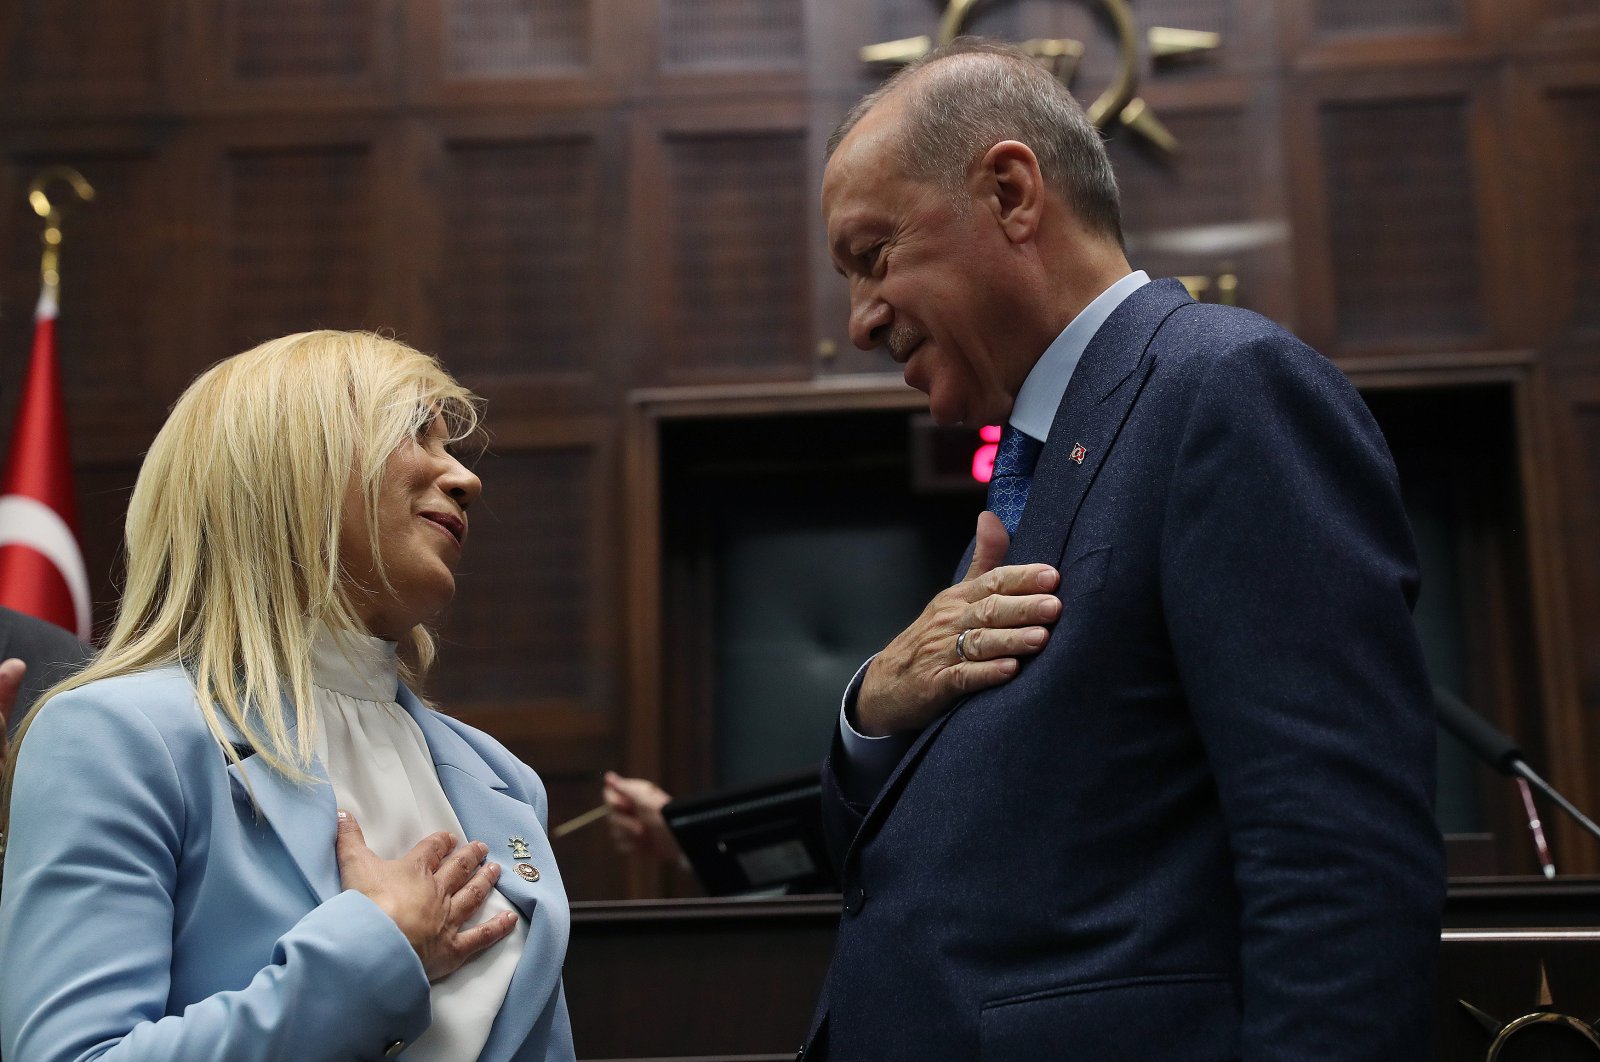 President Recep Tayyip Erdoğan salutes Antalya Deputy Tuba Vural Çokal after she joined the AK Party's ranks during a ceremony in the party's parliamentary group meeting, Ankara, Thursday, March 12, 2020. (AA)